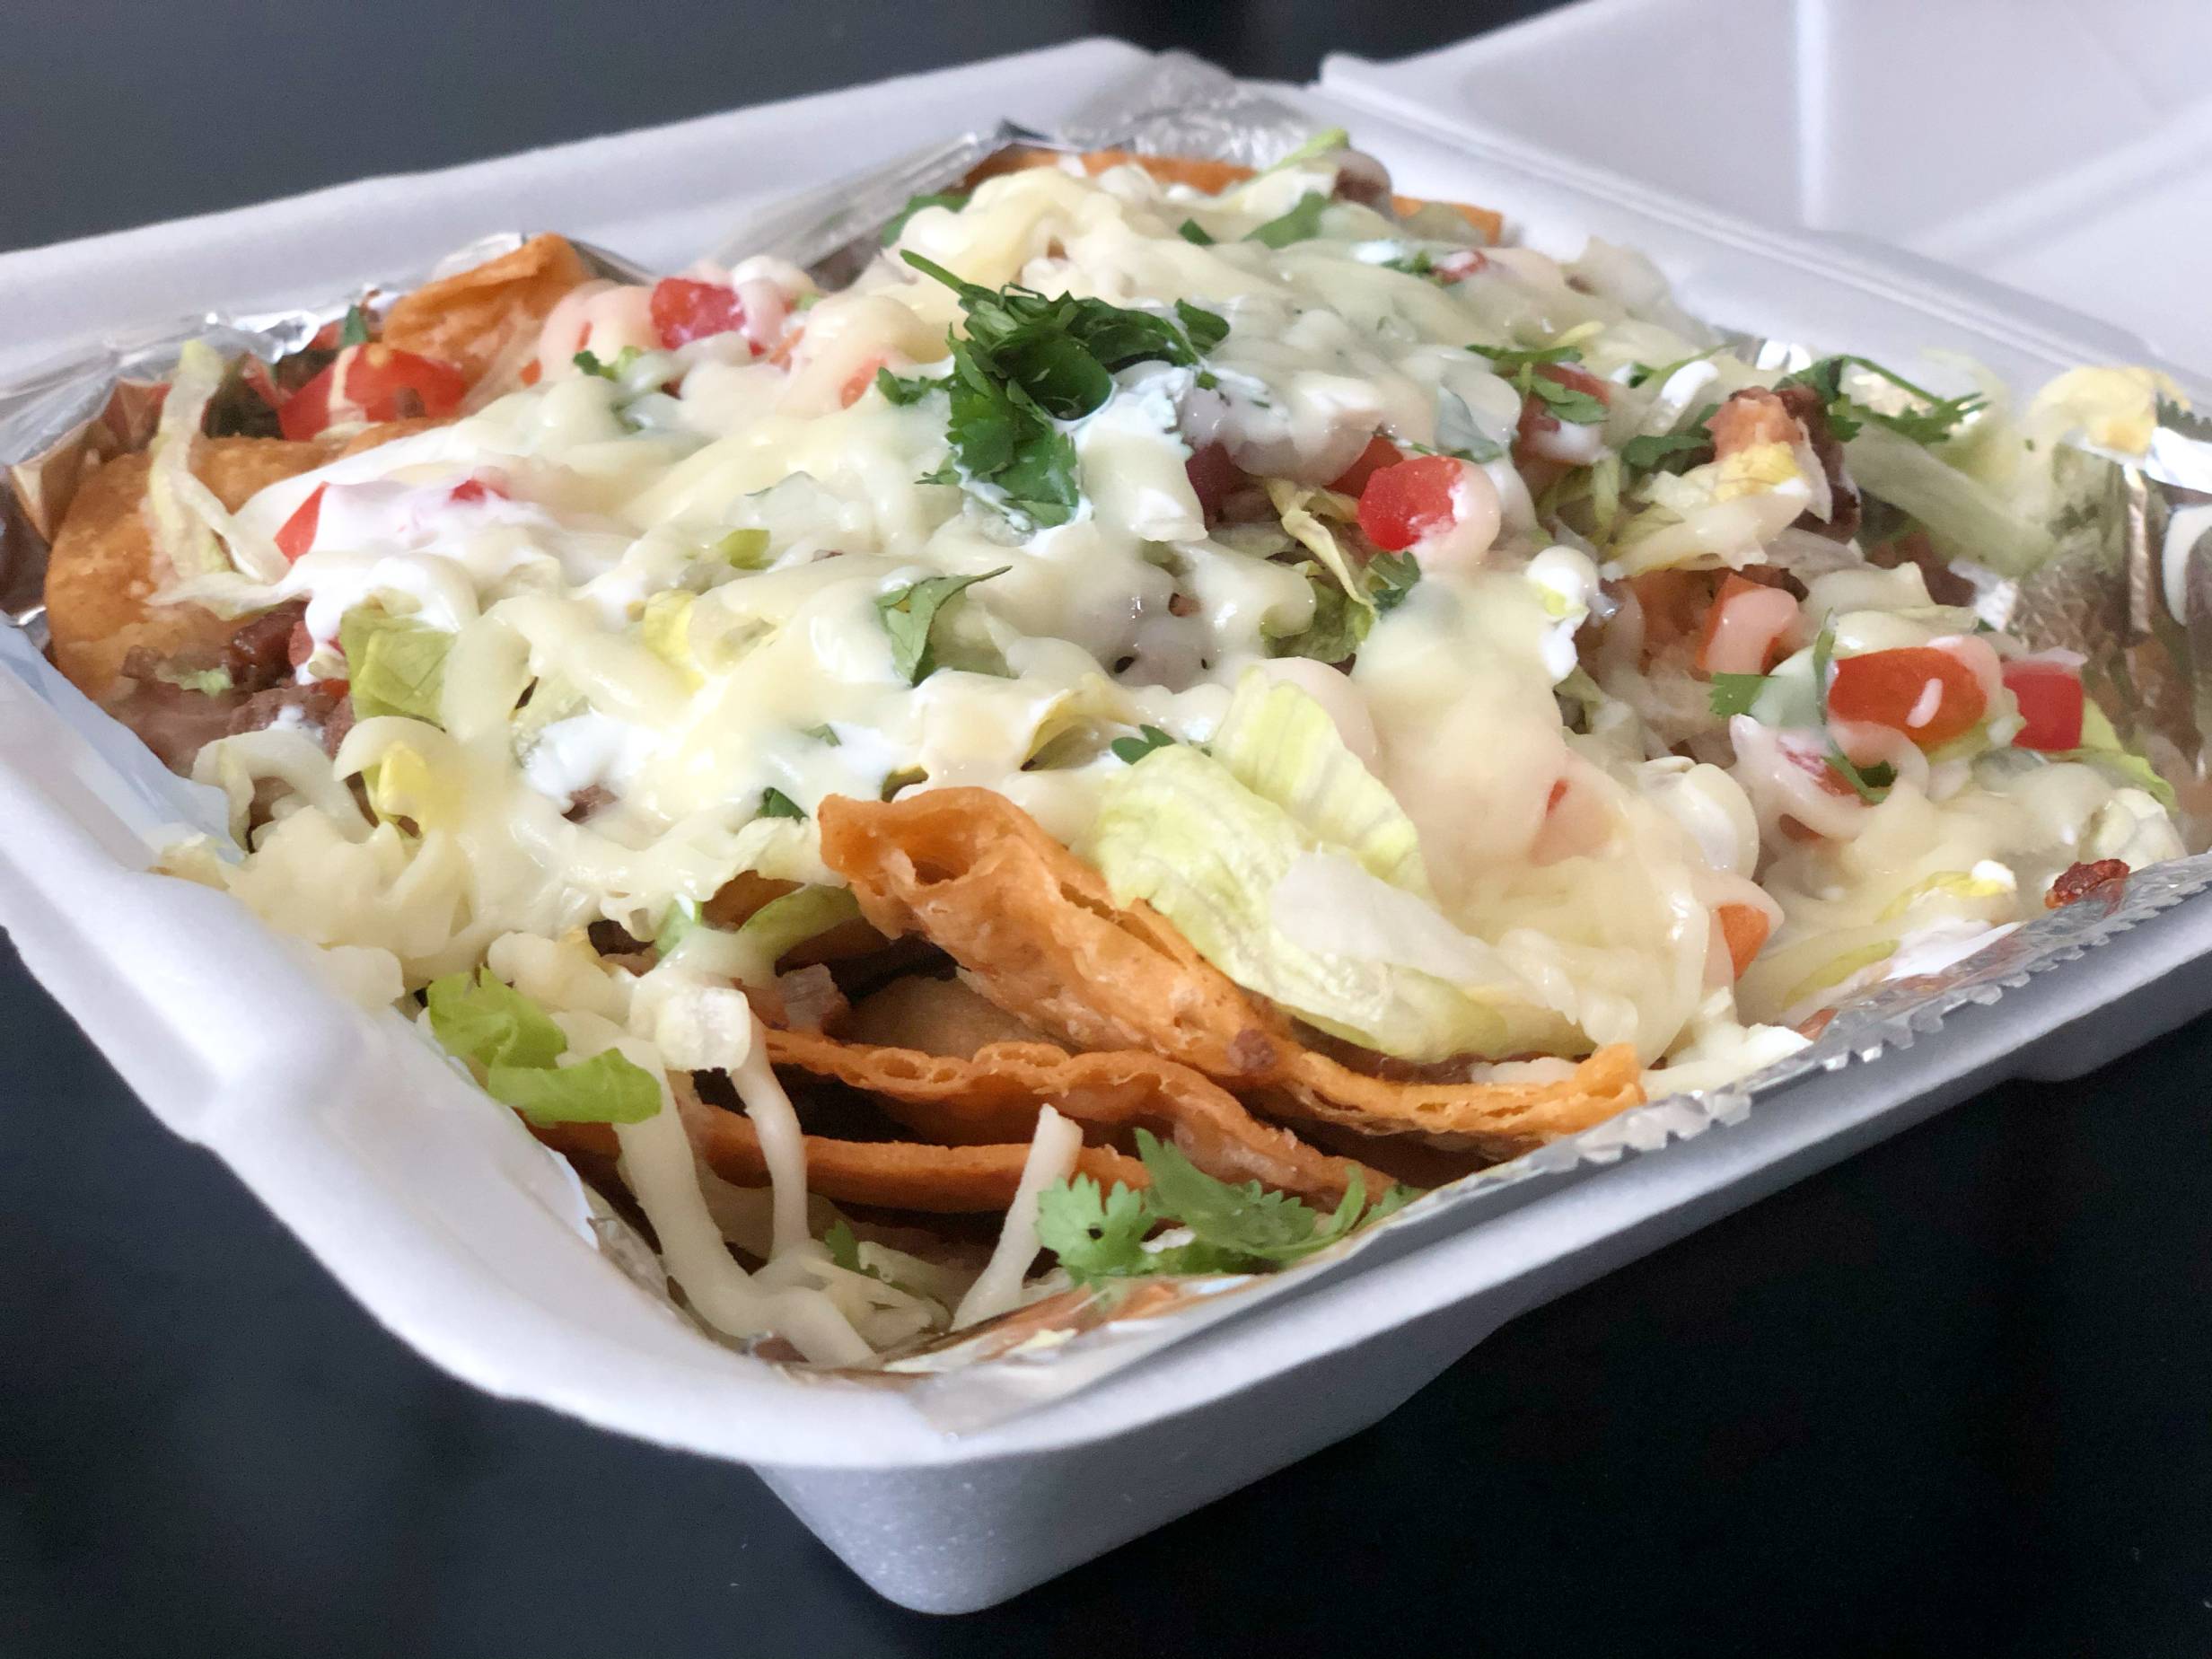 A side shot of nachos featuring crispy corn chips with lots of cheese and sour cream. Photo by Alyssa Buckley.